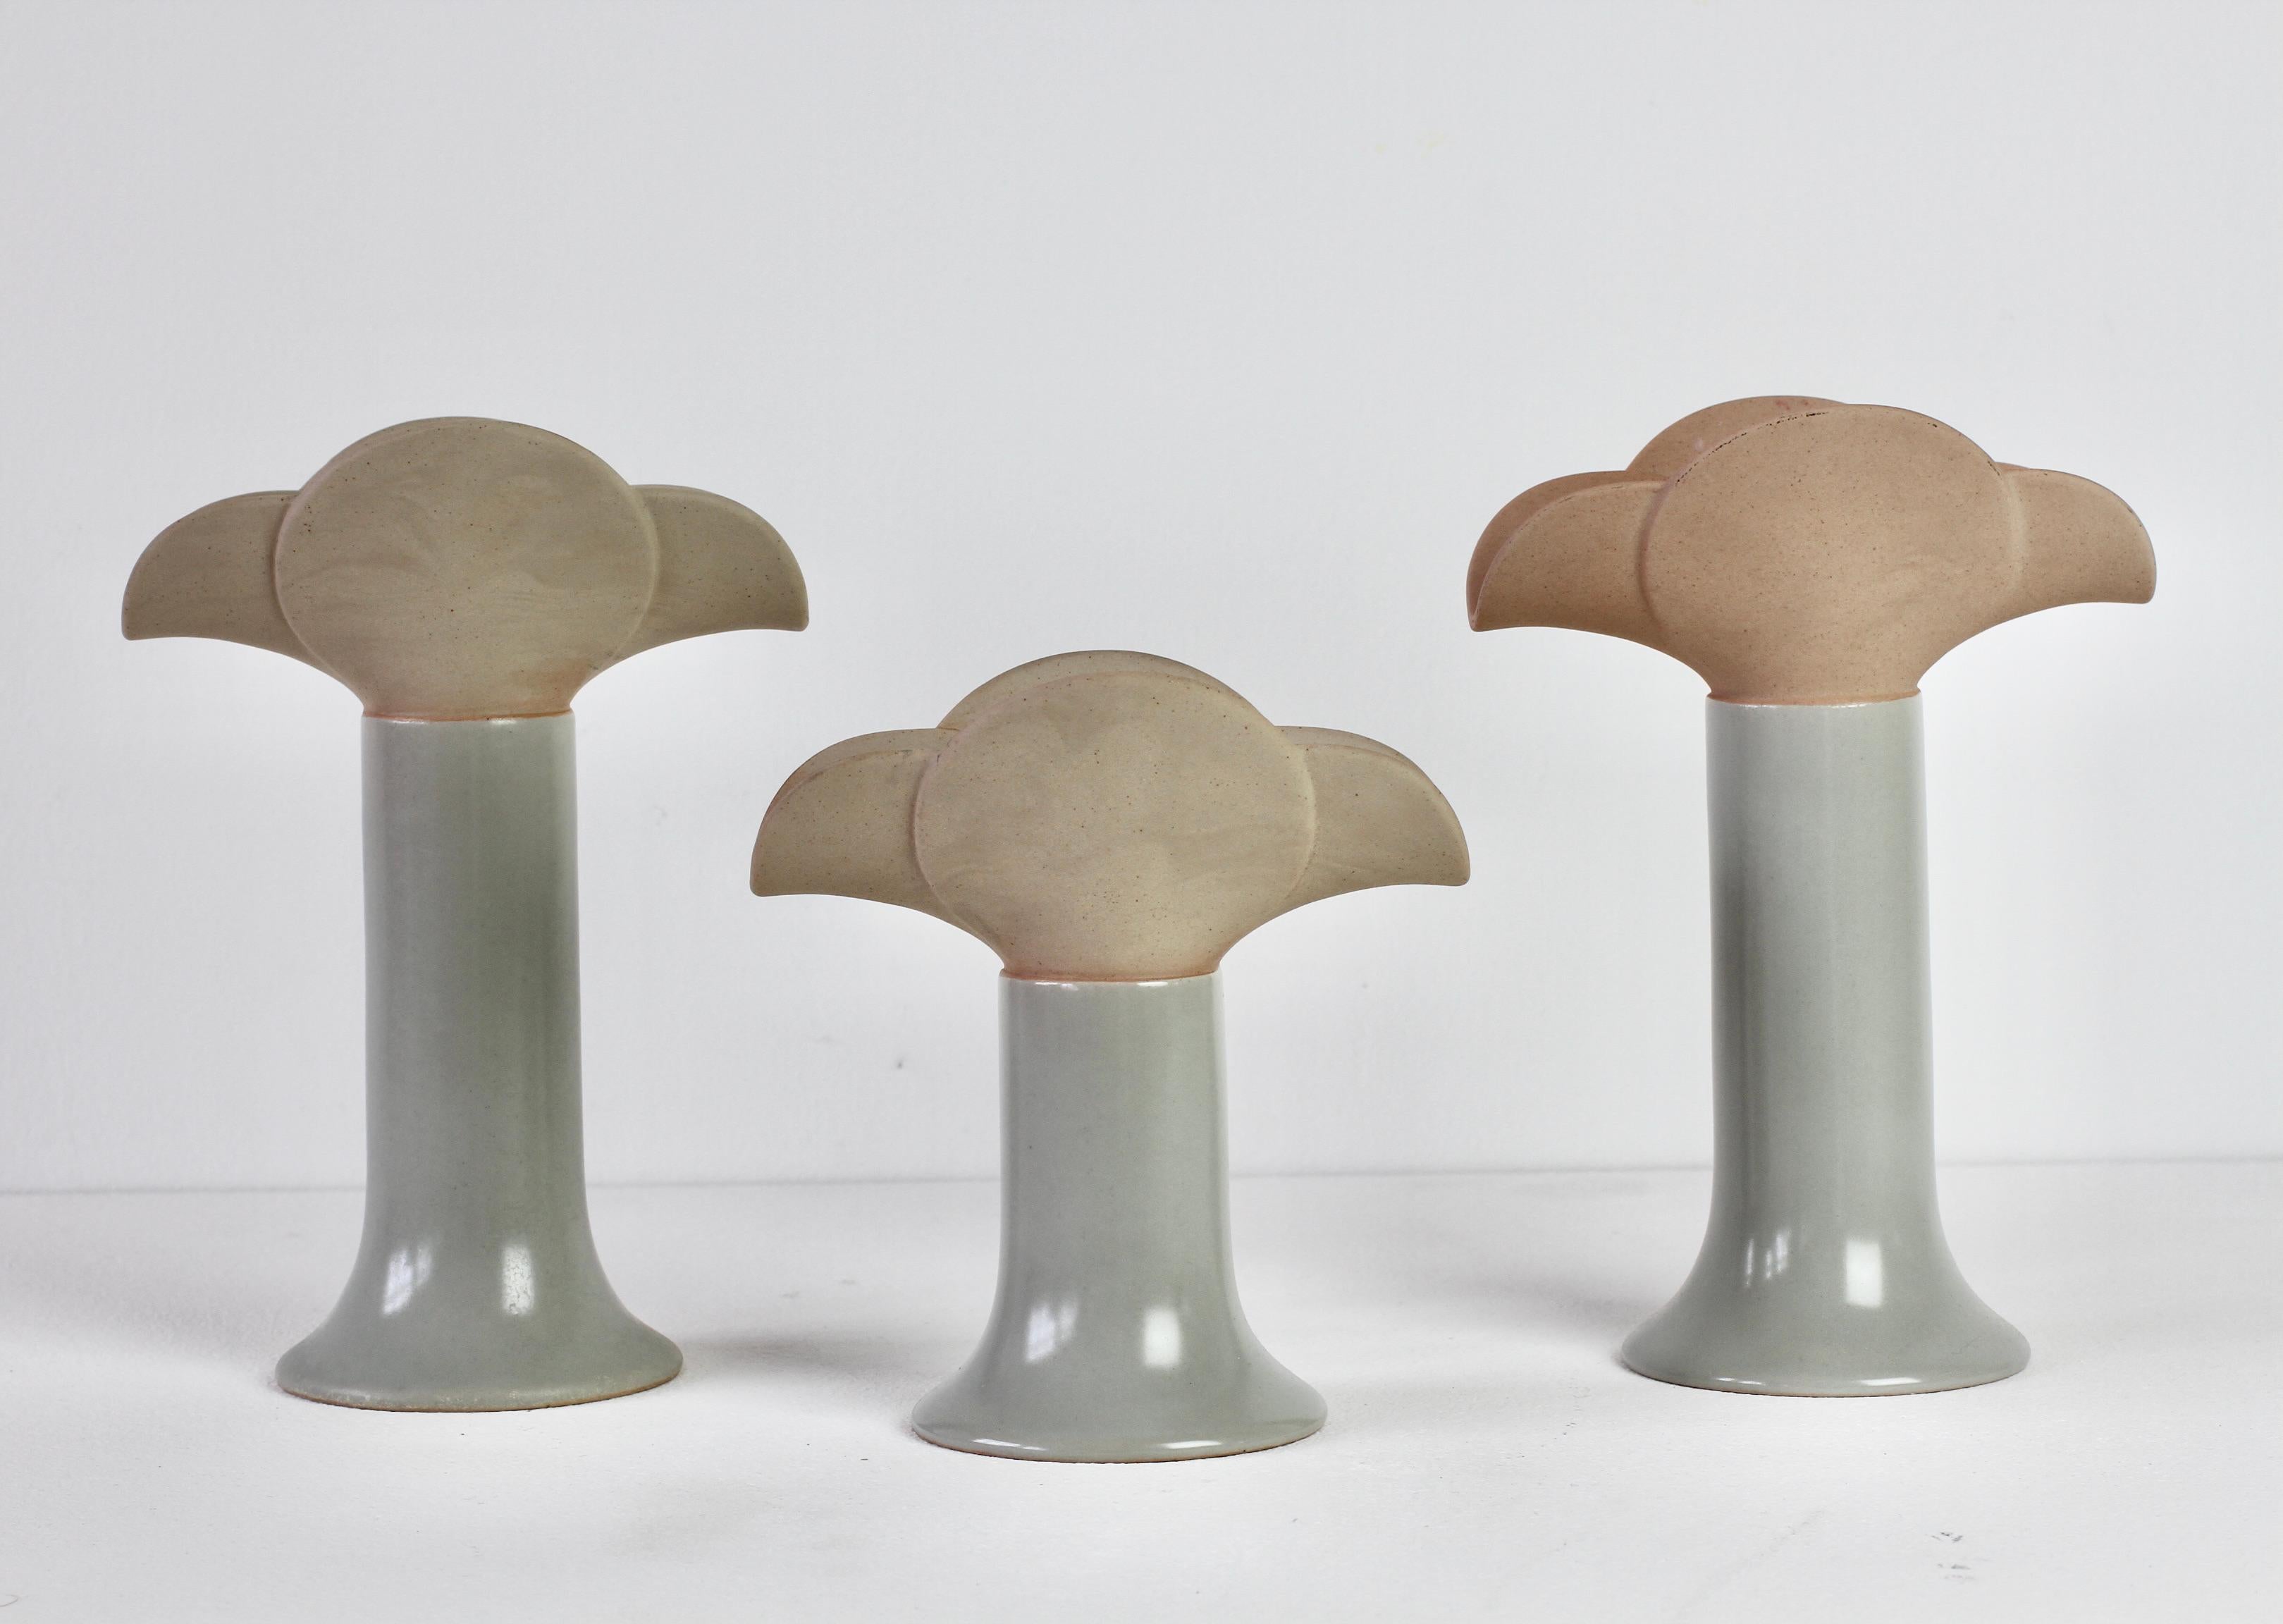 Beautiful set / trio of candleholders designed by Swedish studio ceramist / potter Lisa Larson (b. 1931) for the German company Rosenthal stamped and marked 